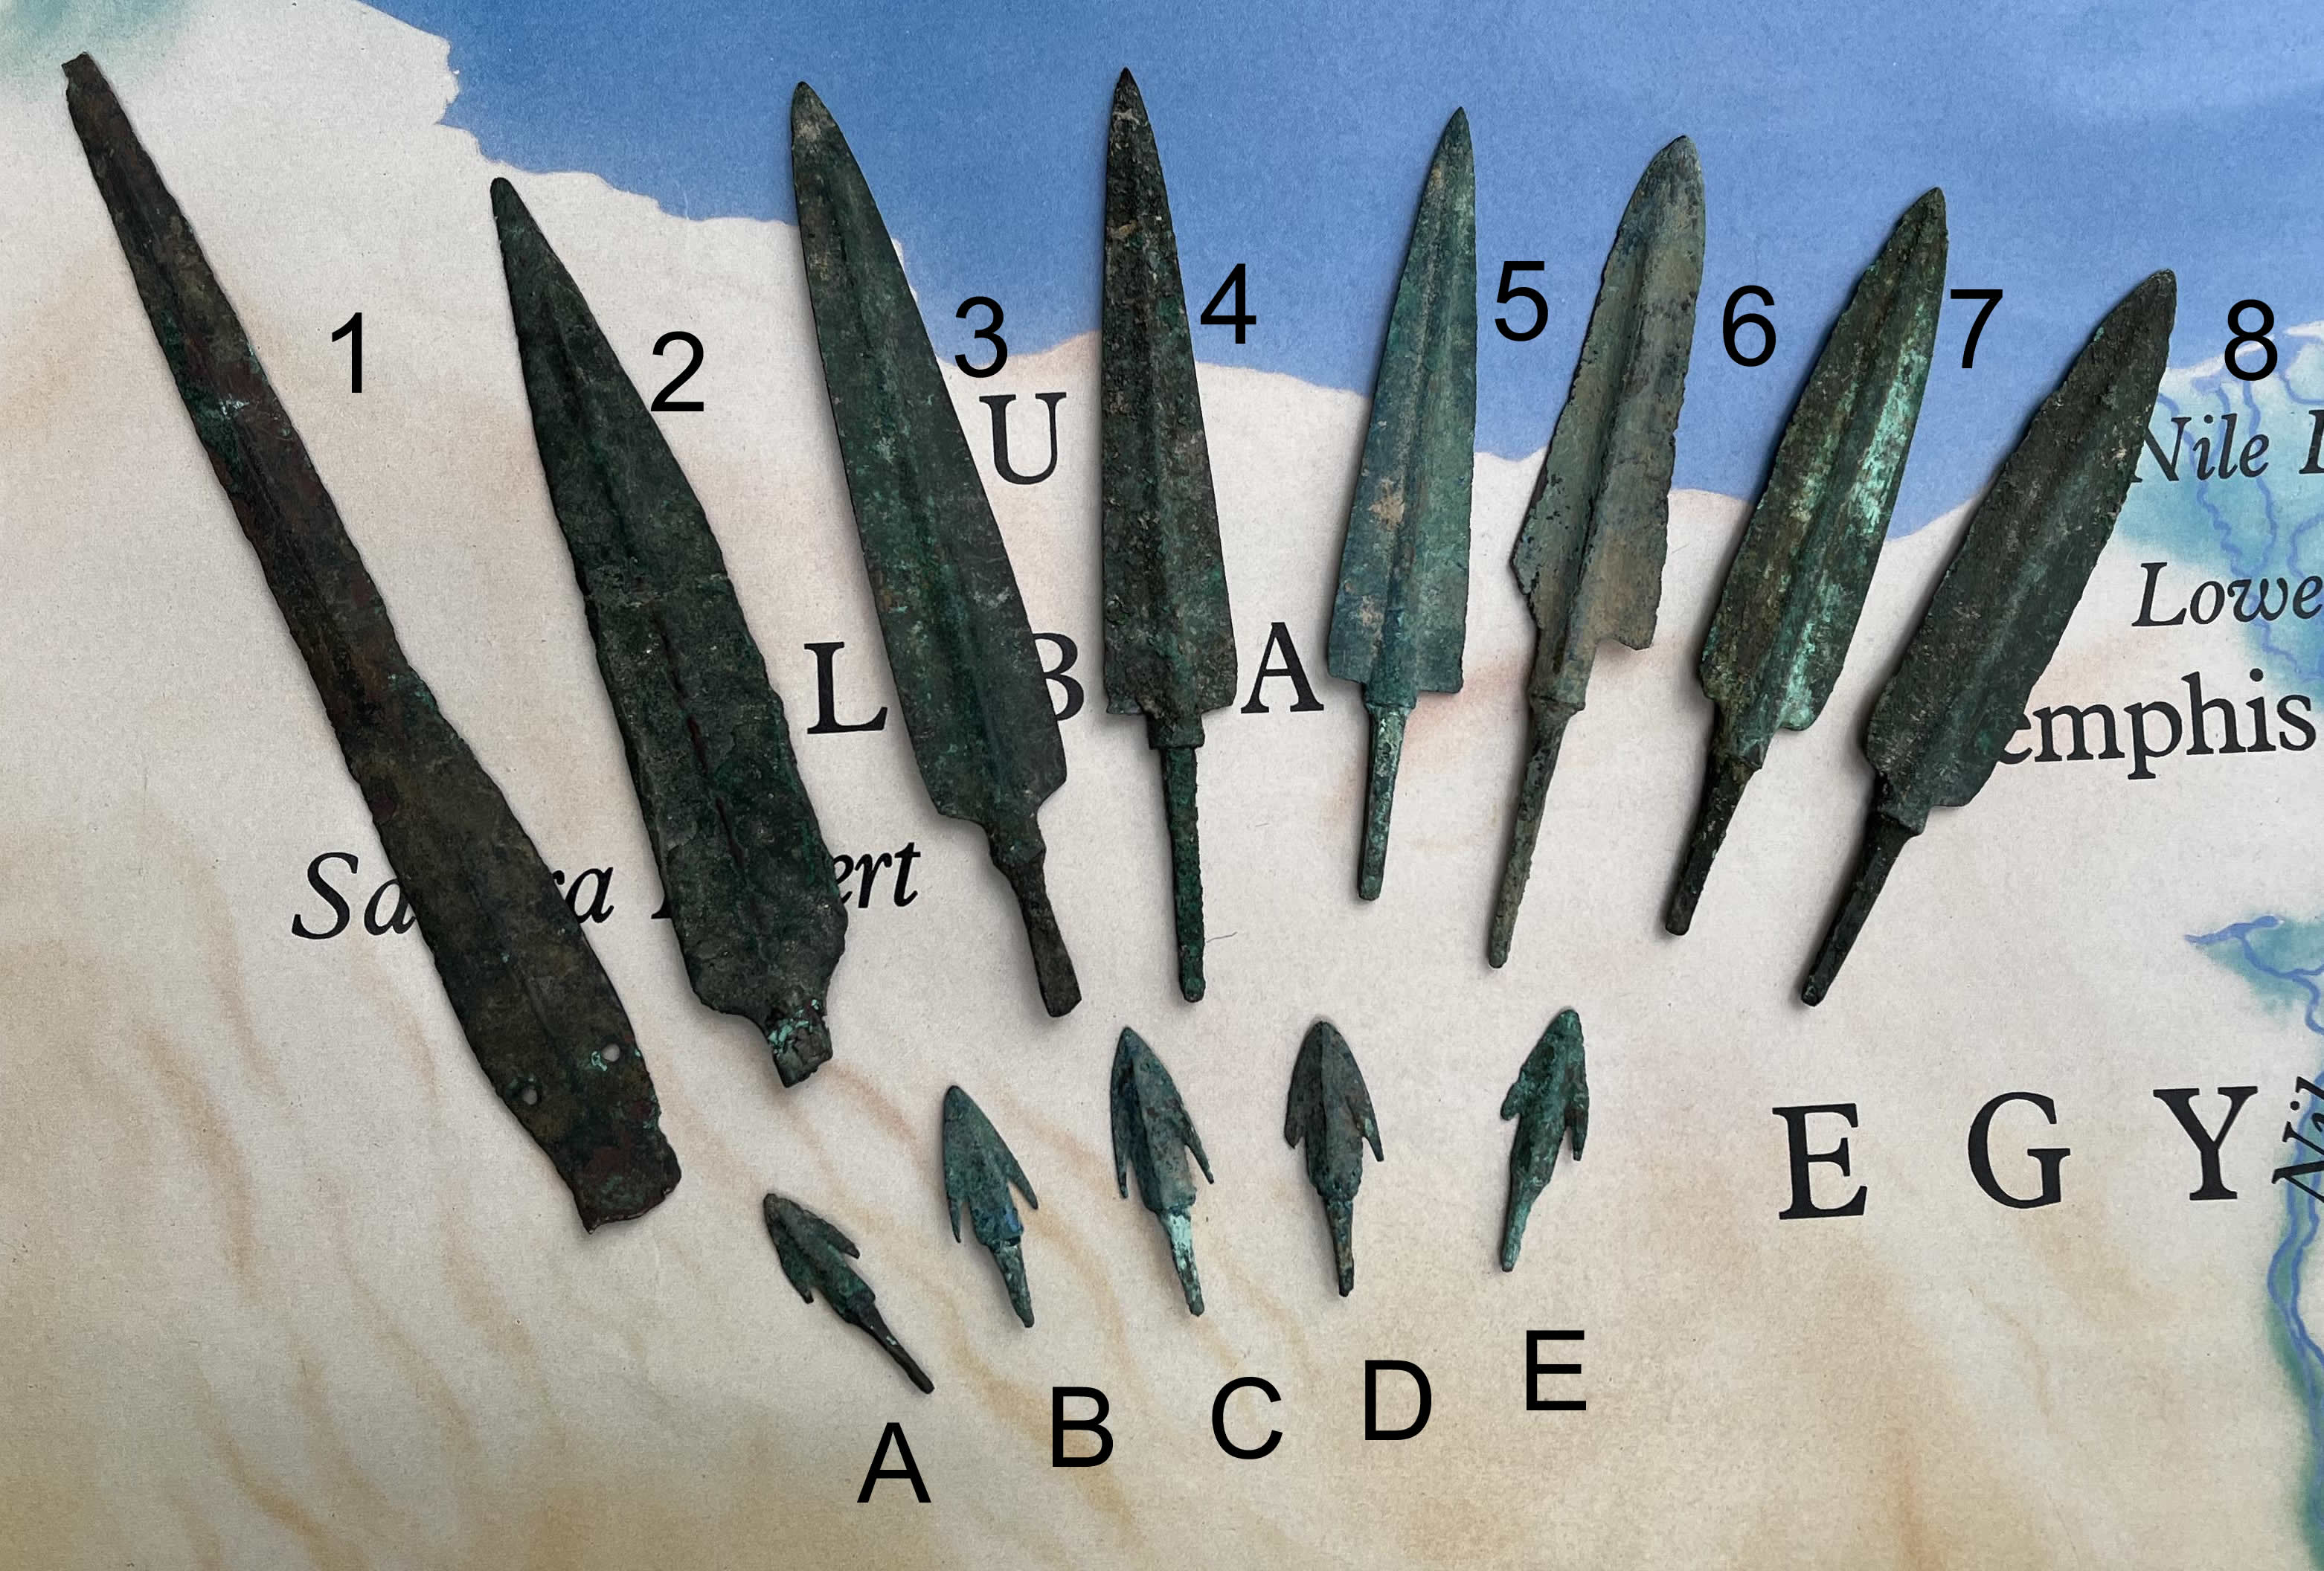 numbered Arrow Points Heads